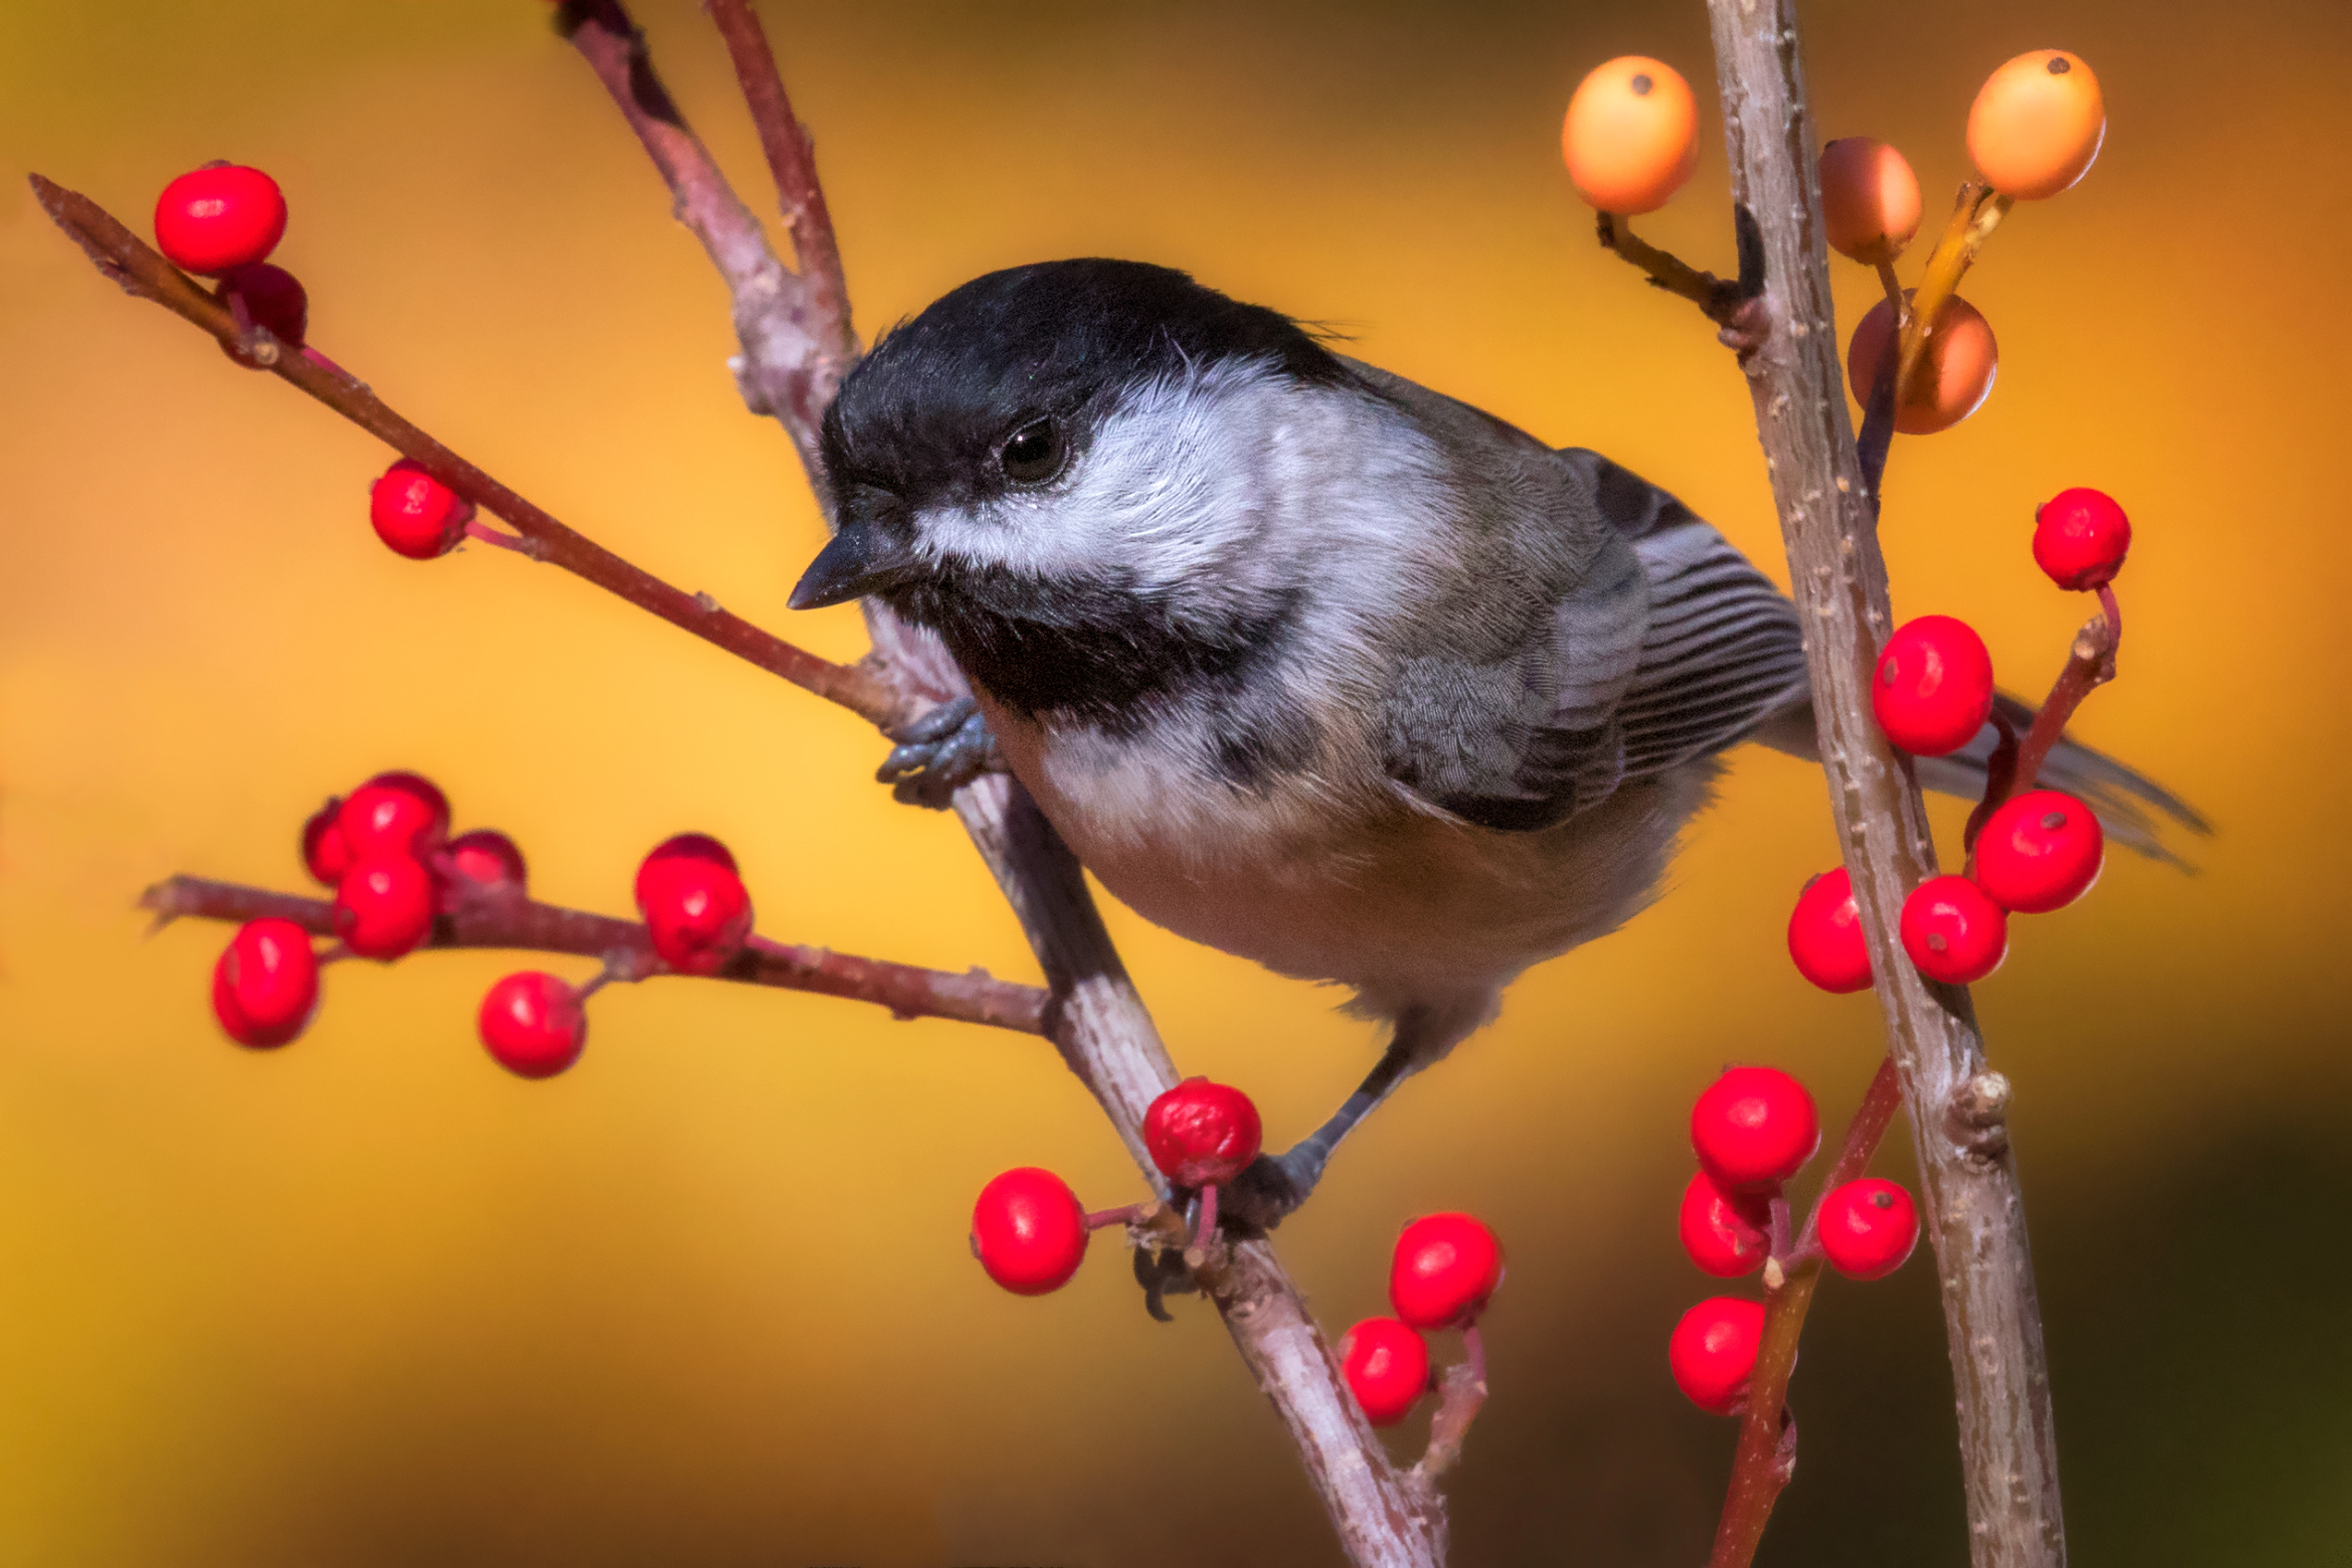 Black-capped Chickadee is a small nonmigratory song bird. It feeds insects, seeds and berries.